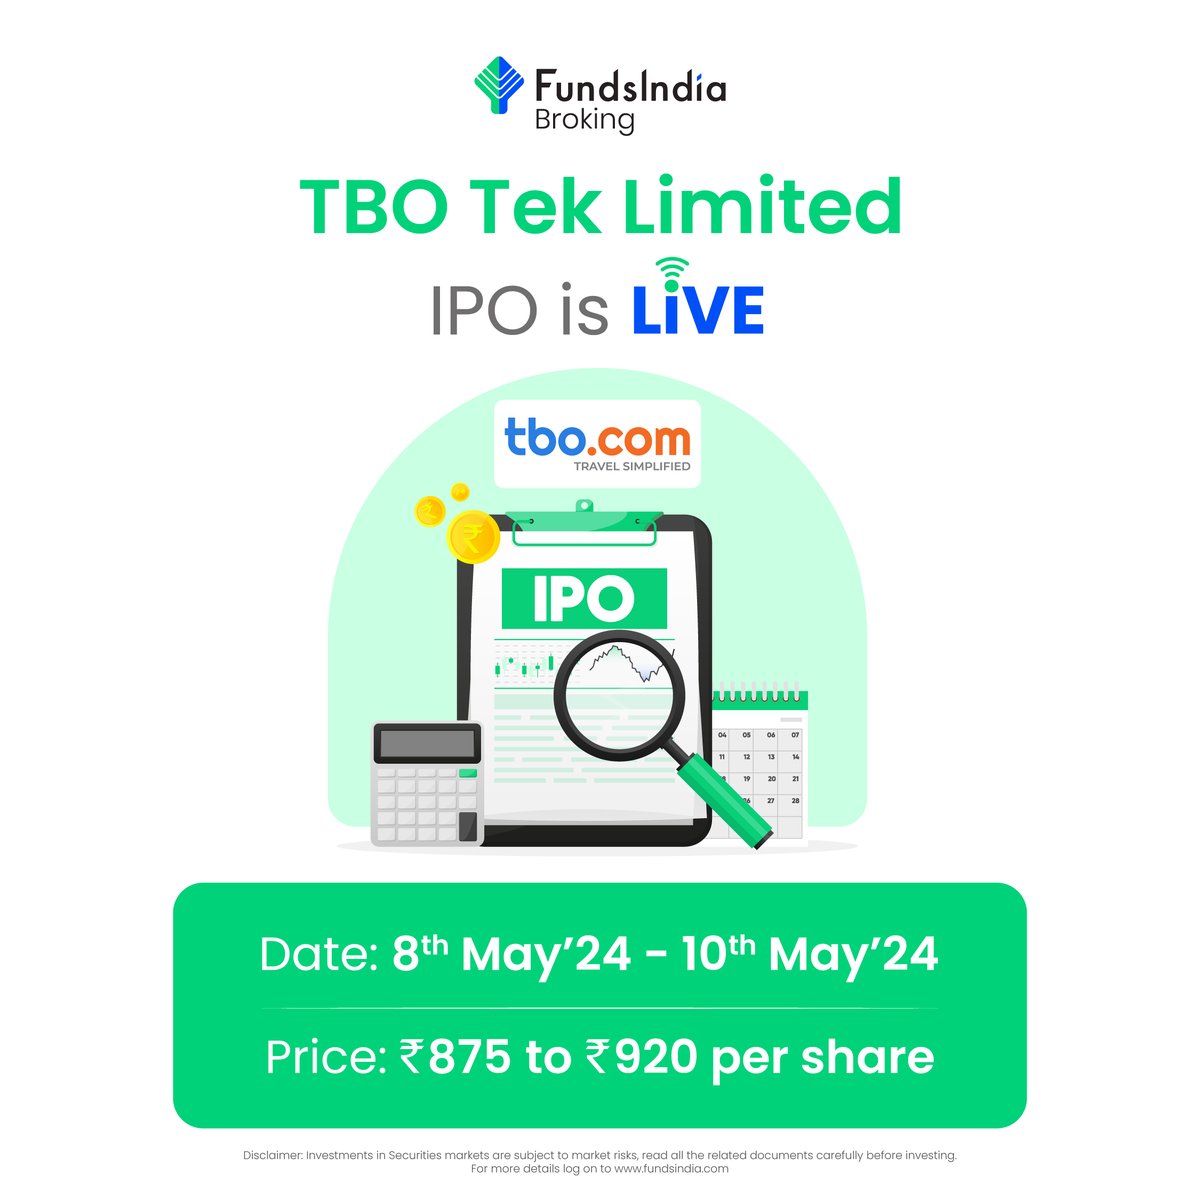 #IPOAlert 

It's an #IPO launch day for #TBOTEK Ltd  

The minimum lot size for an application is 16 shares, with a minimum investment of ₹14,720 for retail investors.  

Has this IPO caught your Attention? Comment below👇

#StockMarkets #IPOALERT #fundsindia #stockmarketcrash